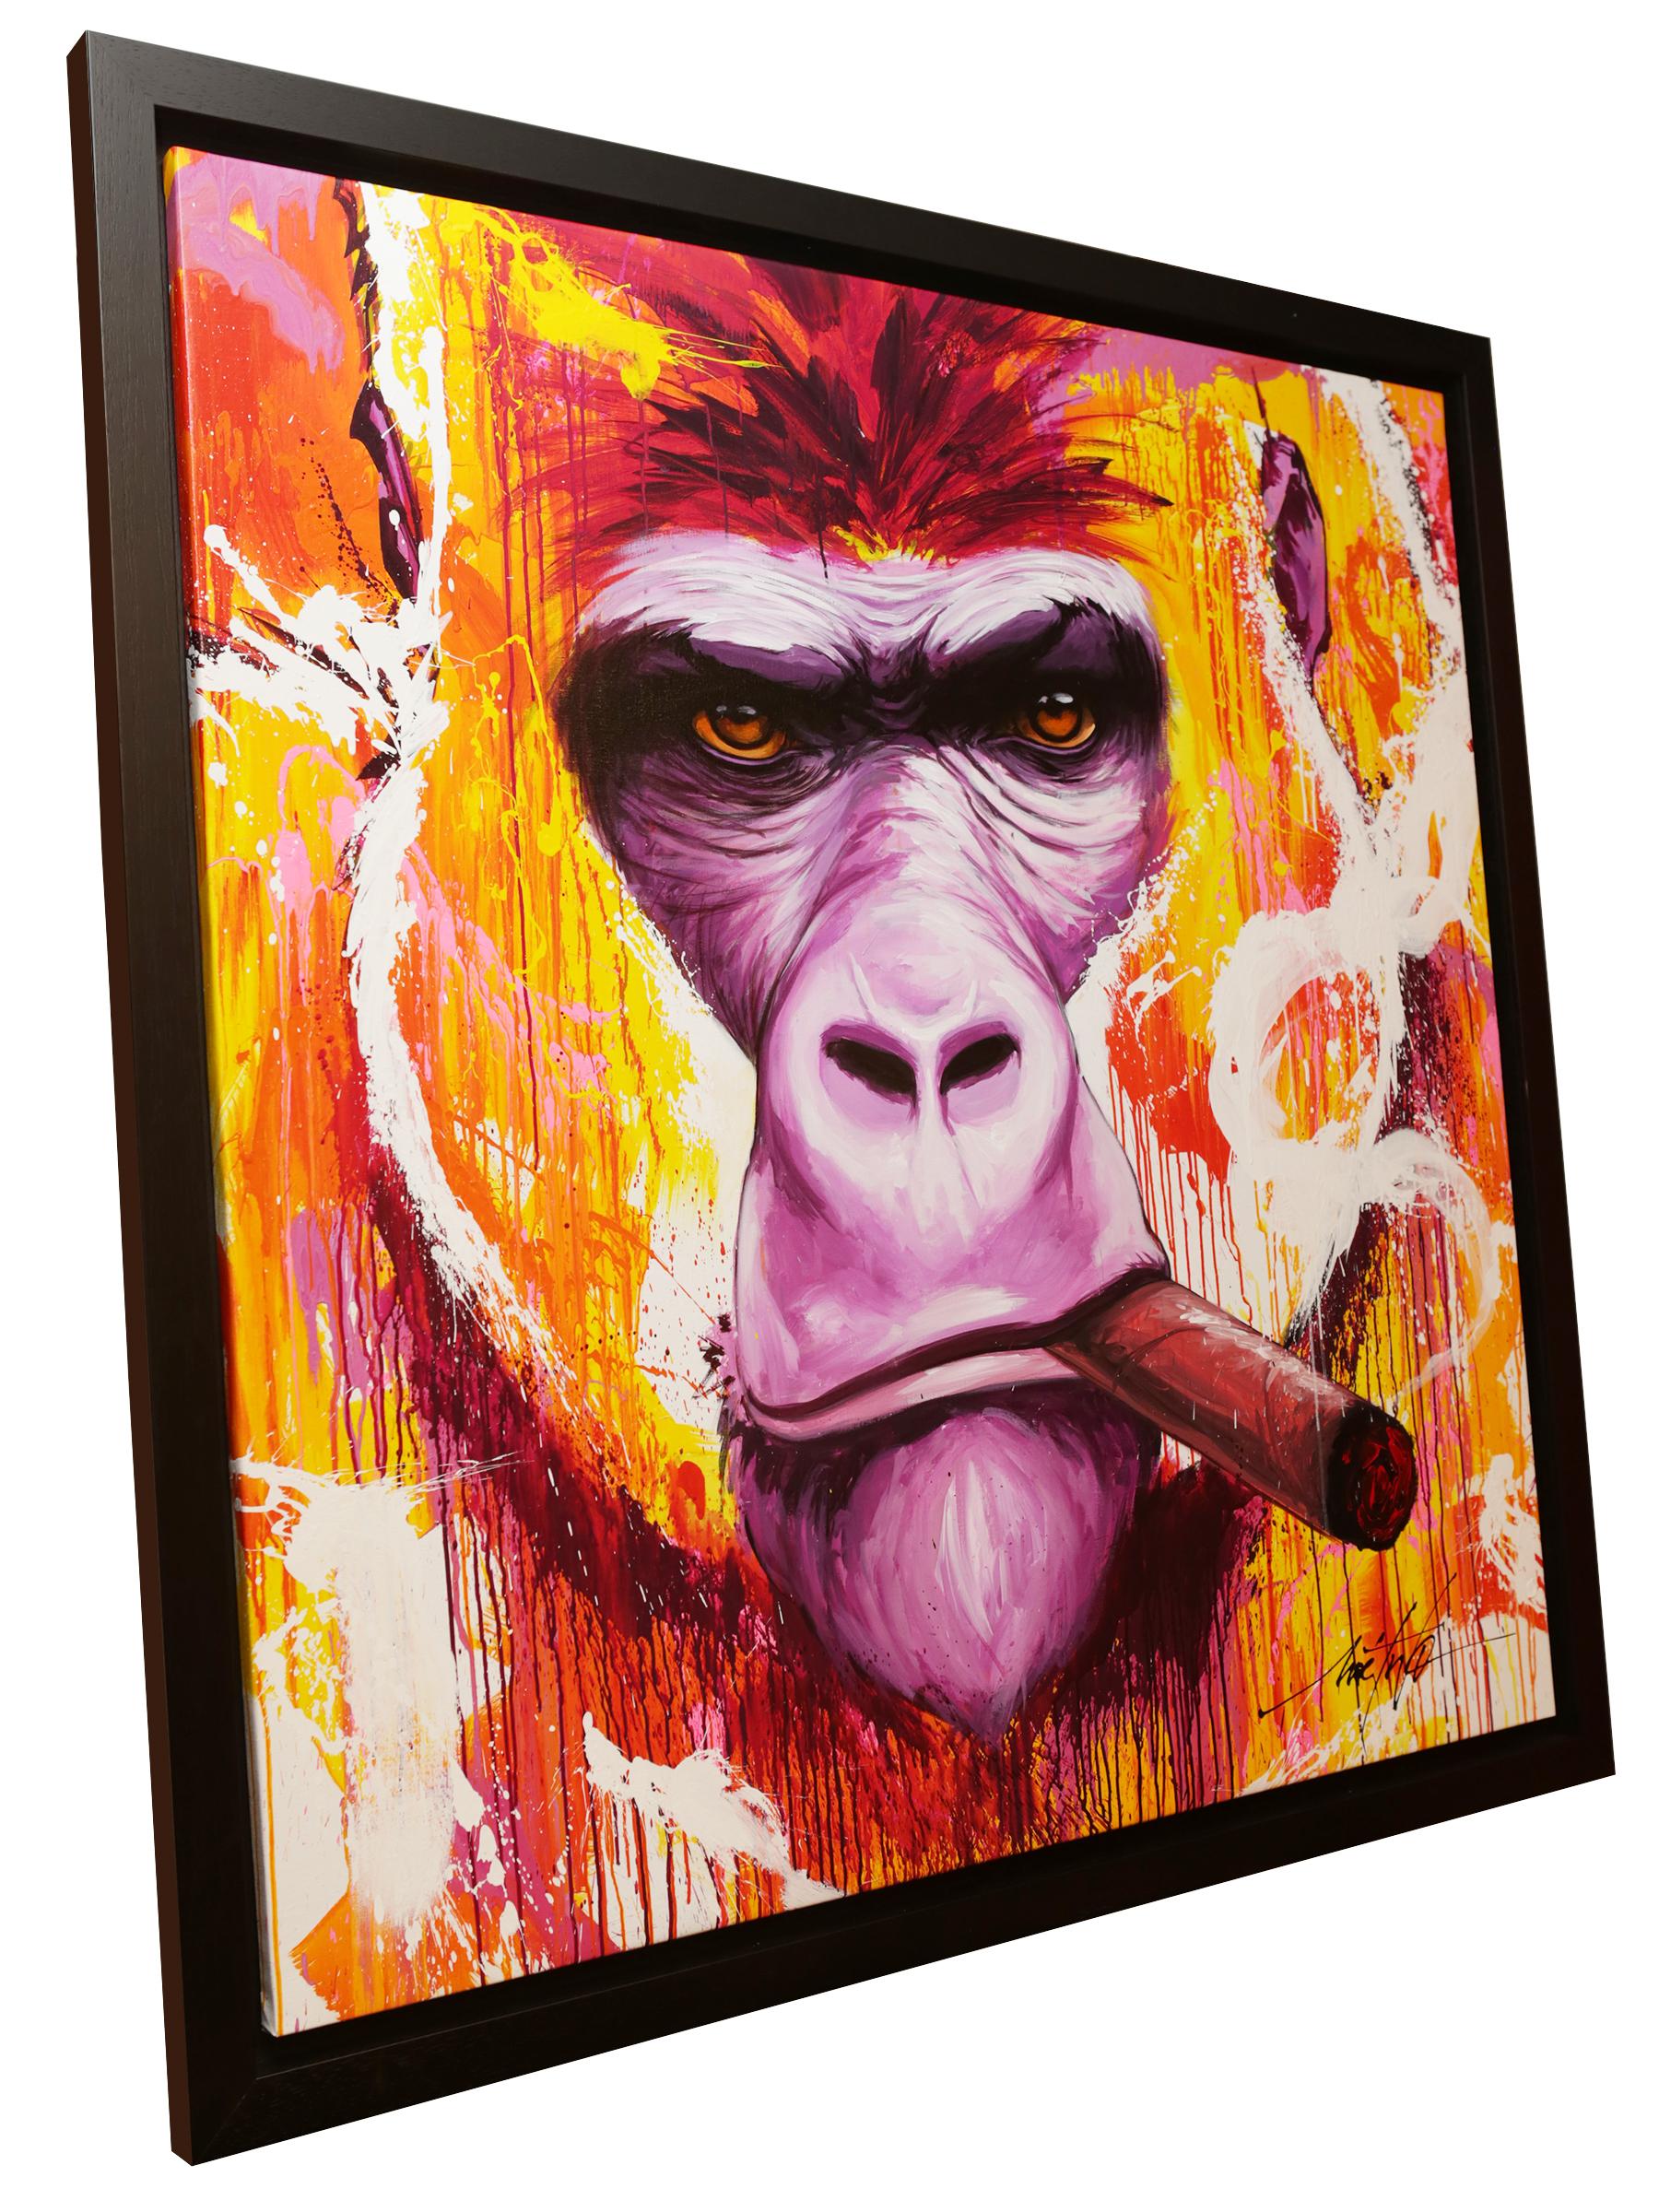 Painting Yaounde smoke a cigar,
on canvas: Measures: L 140 x W 140cm. Under
American black oak wooden frame.
Exceptional and unique piece.
By Noe Two. Made in France in 2019.